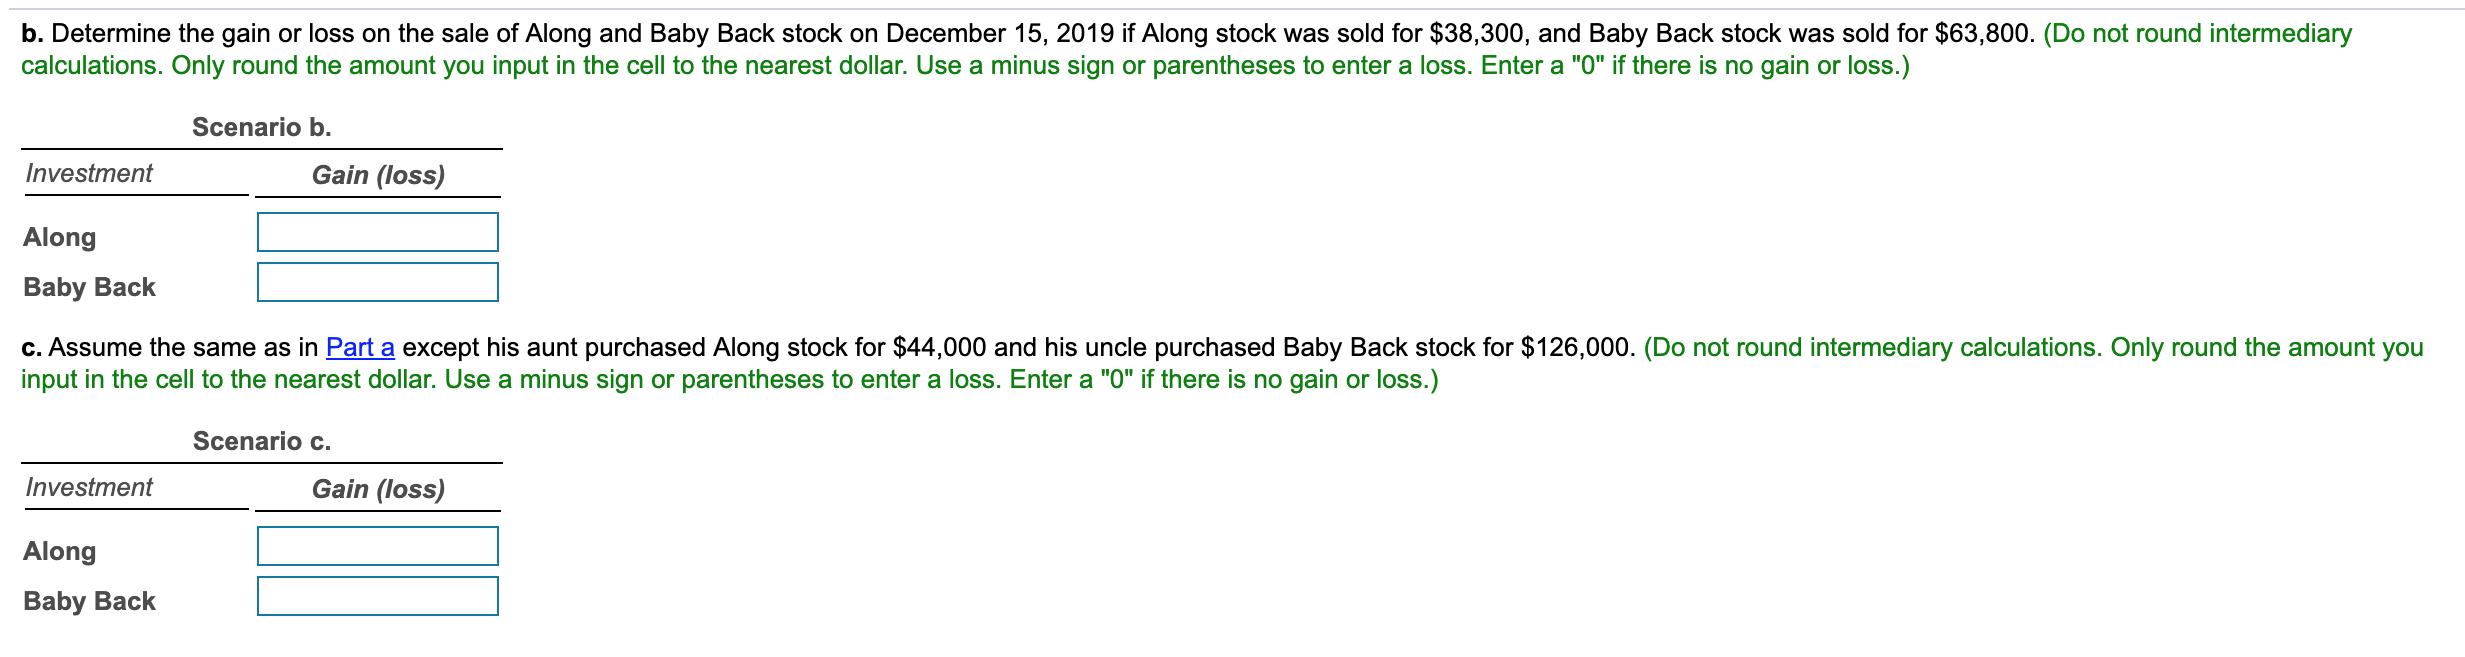 b. Determine the gain or loss on the sale of Along and Baby Back stock on December 15, 2019 if Along stock was sold for $38,3